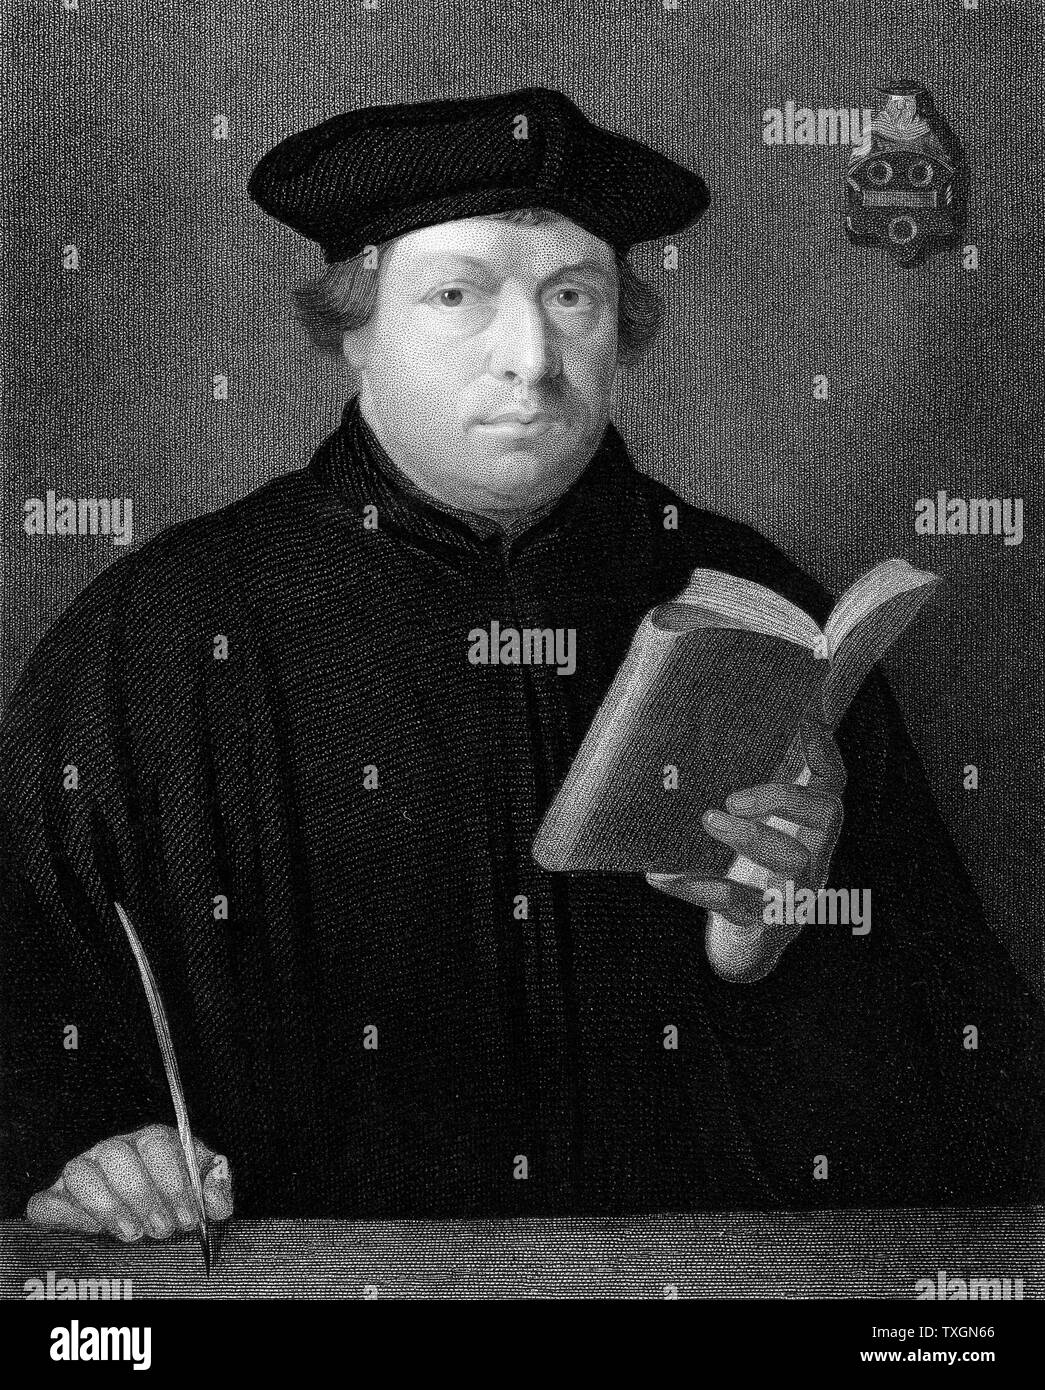 Martin Luther (1481-1546), German Protestant reformer. Engraving c.1830 Stock Photo